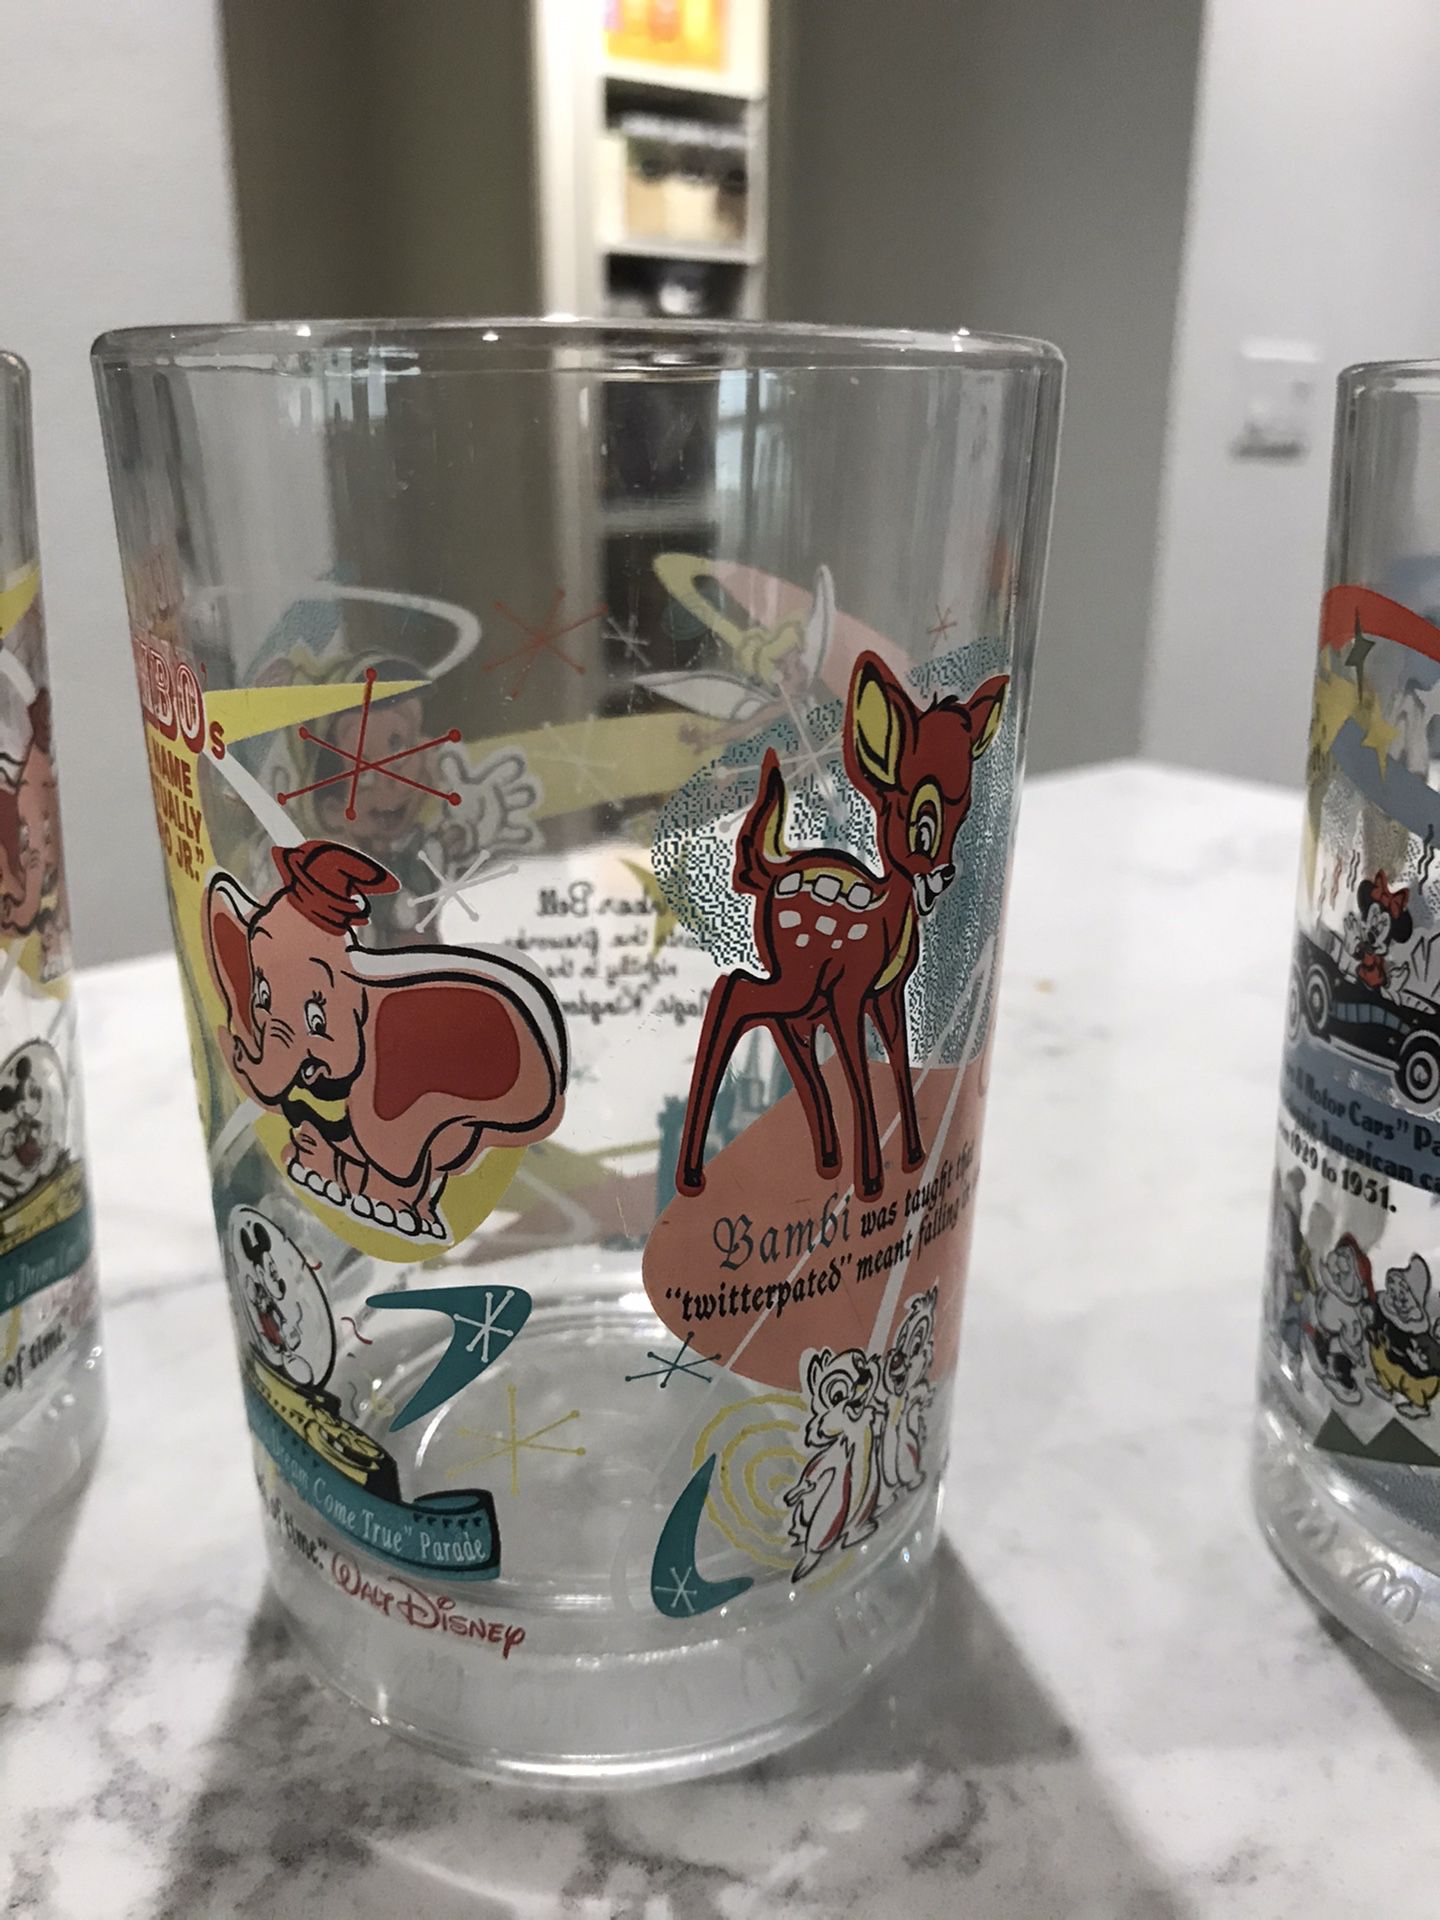 Collectable Disney glasses from Mcdonalds